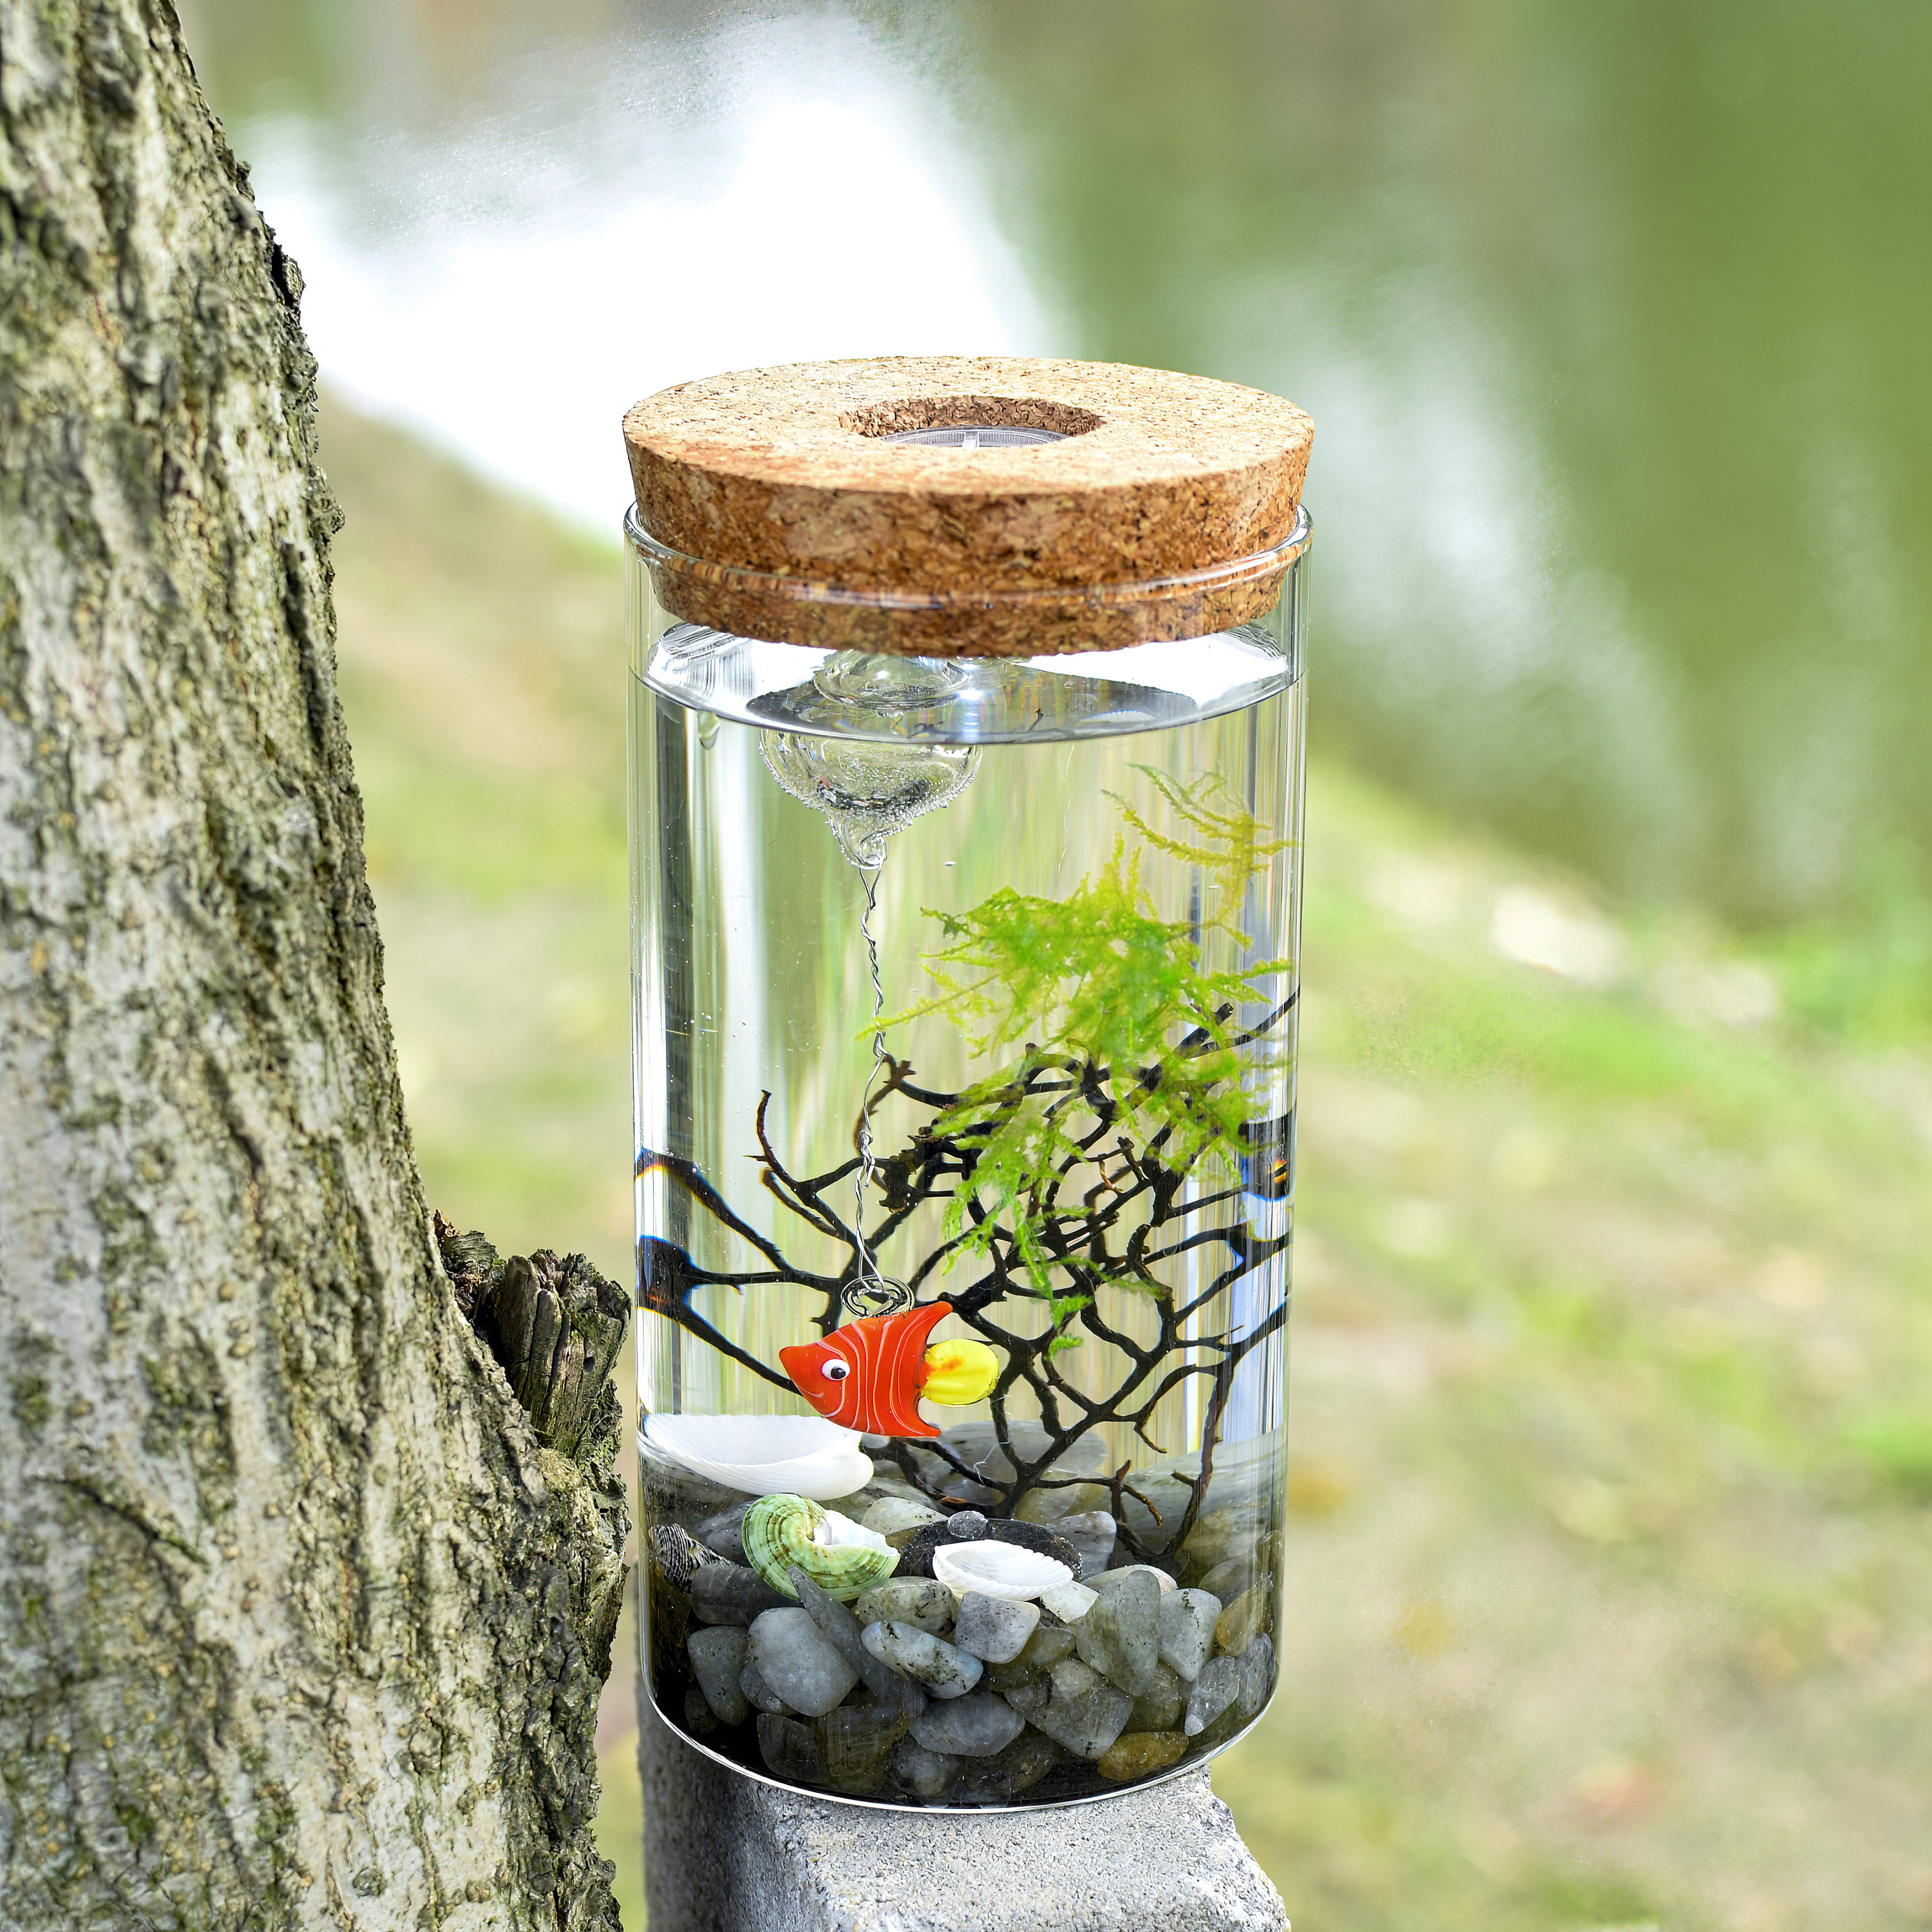 EcoSphere Small Water Drop, The World's First Totally Enclosed